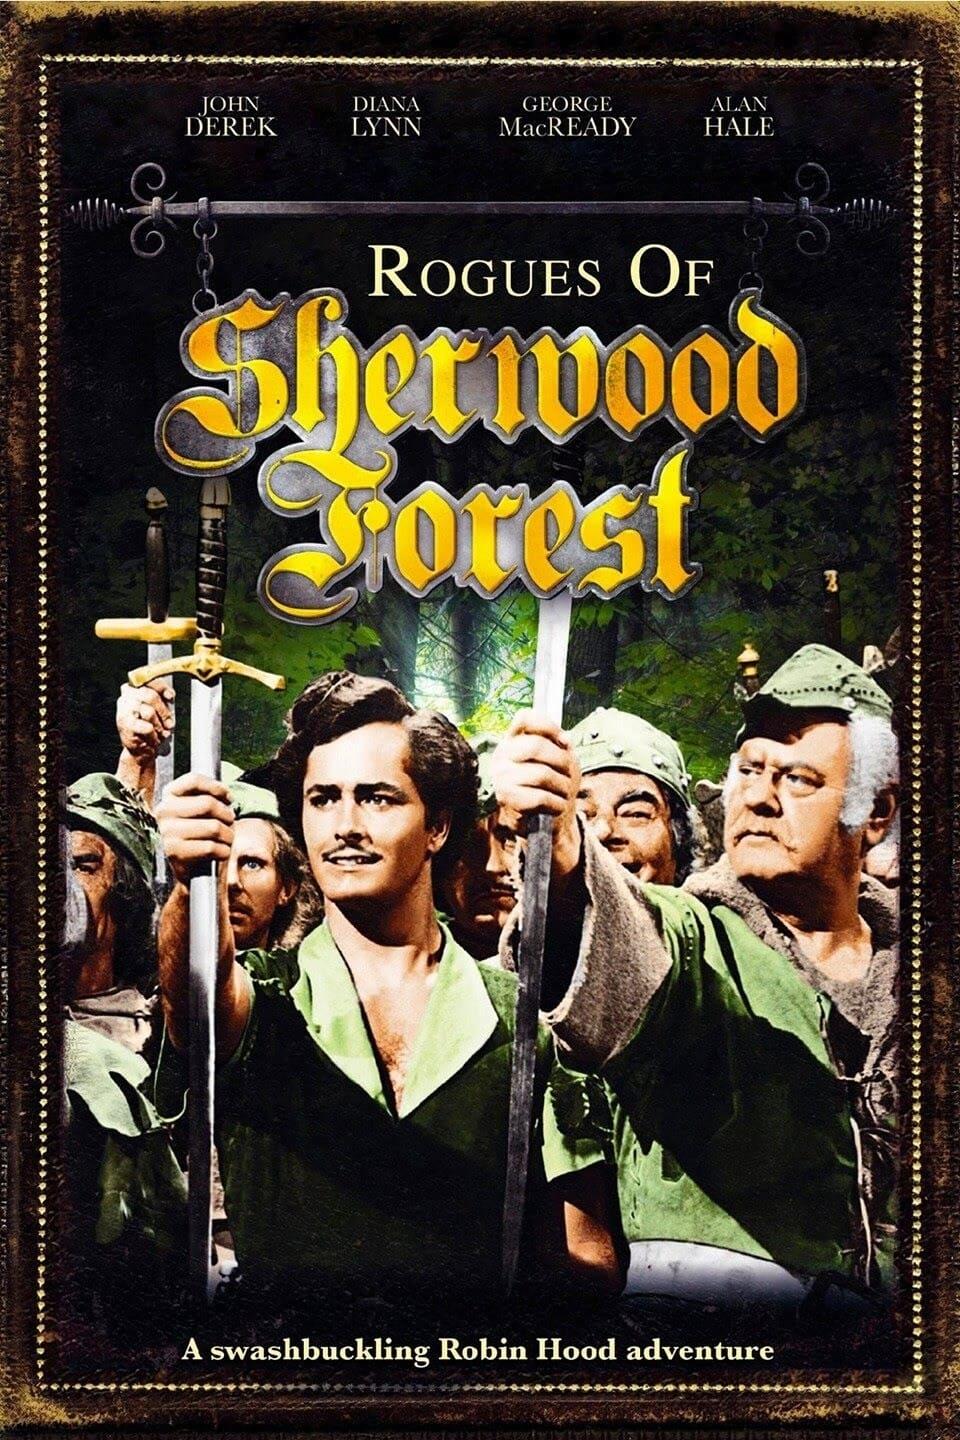 Rogues of Sherwood Forest poster